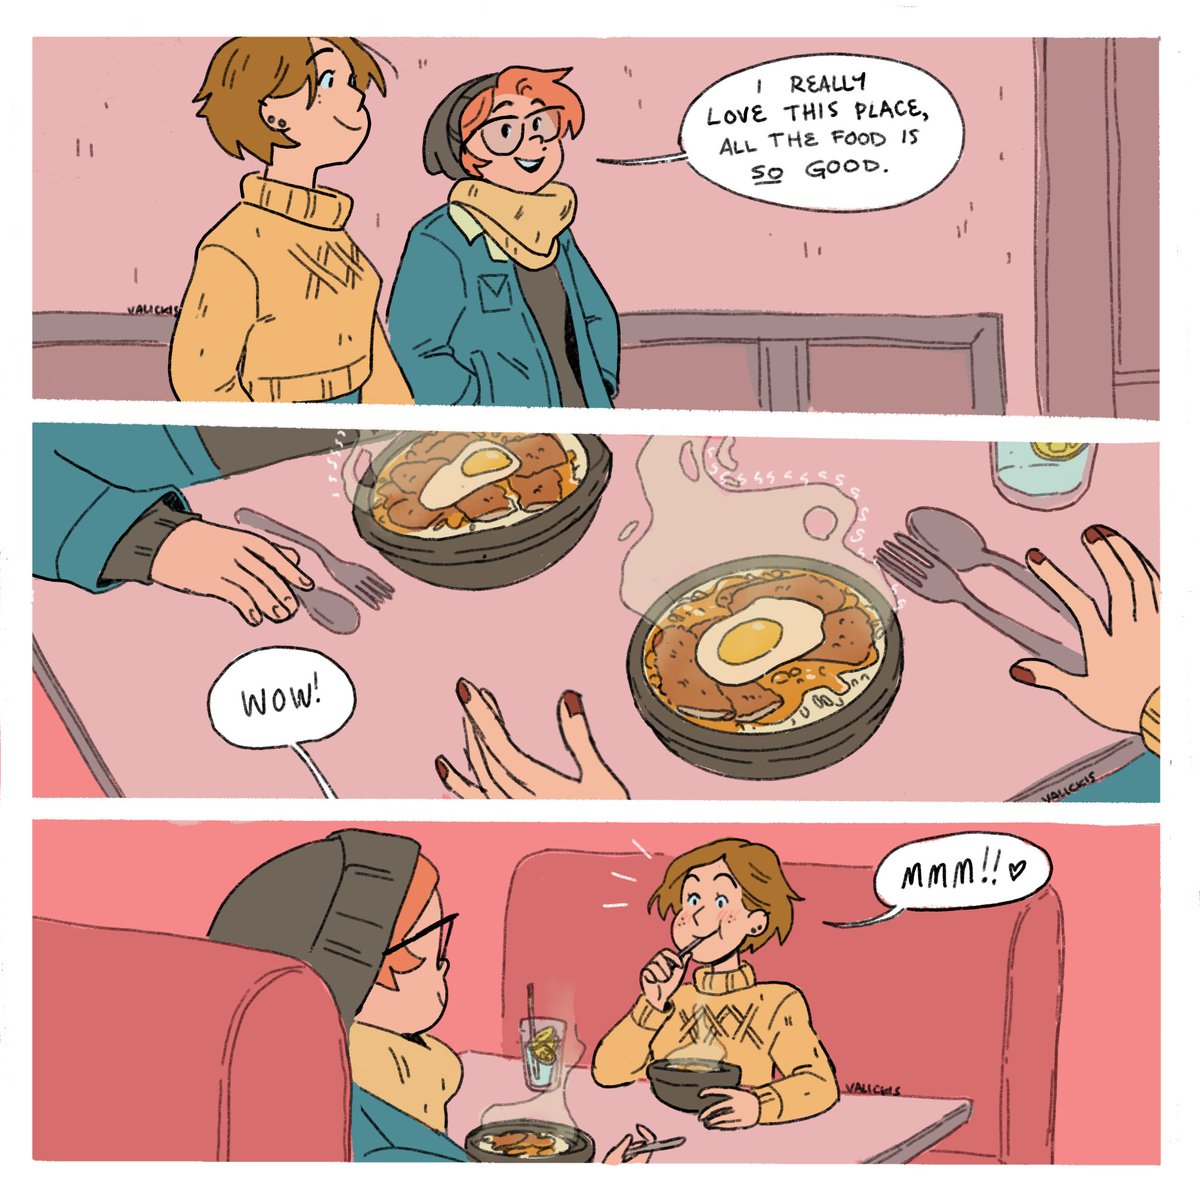 Great food, great friend!  (they/them)